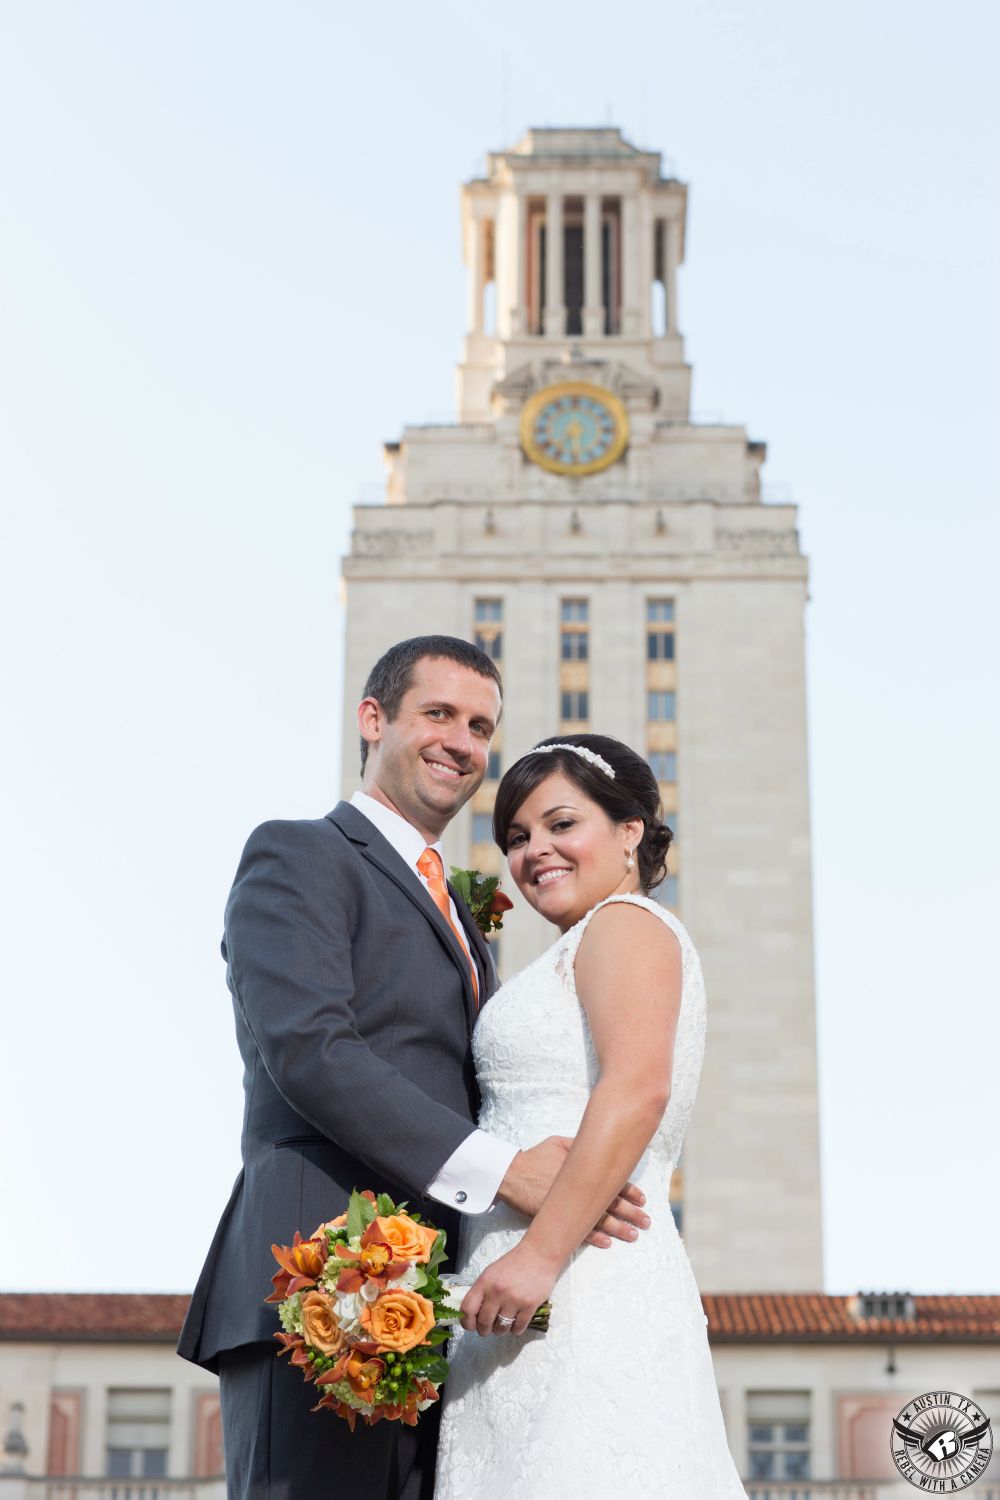 Bride with orange orchid bouquet by Fancy Florals Austin wedding florist and groom in grey suit on their wedding day in front of the UT tower at the University of Texas campus.